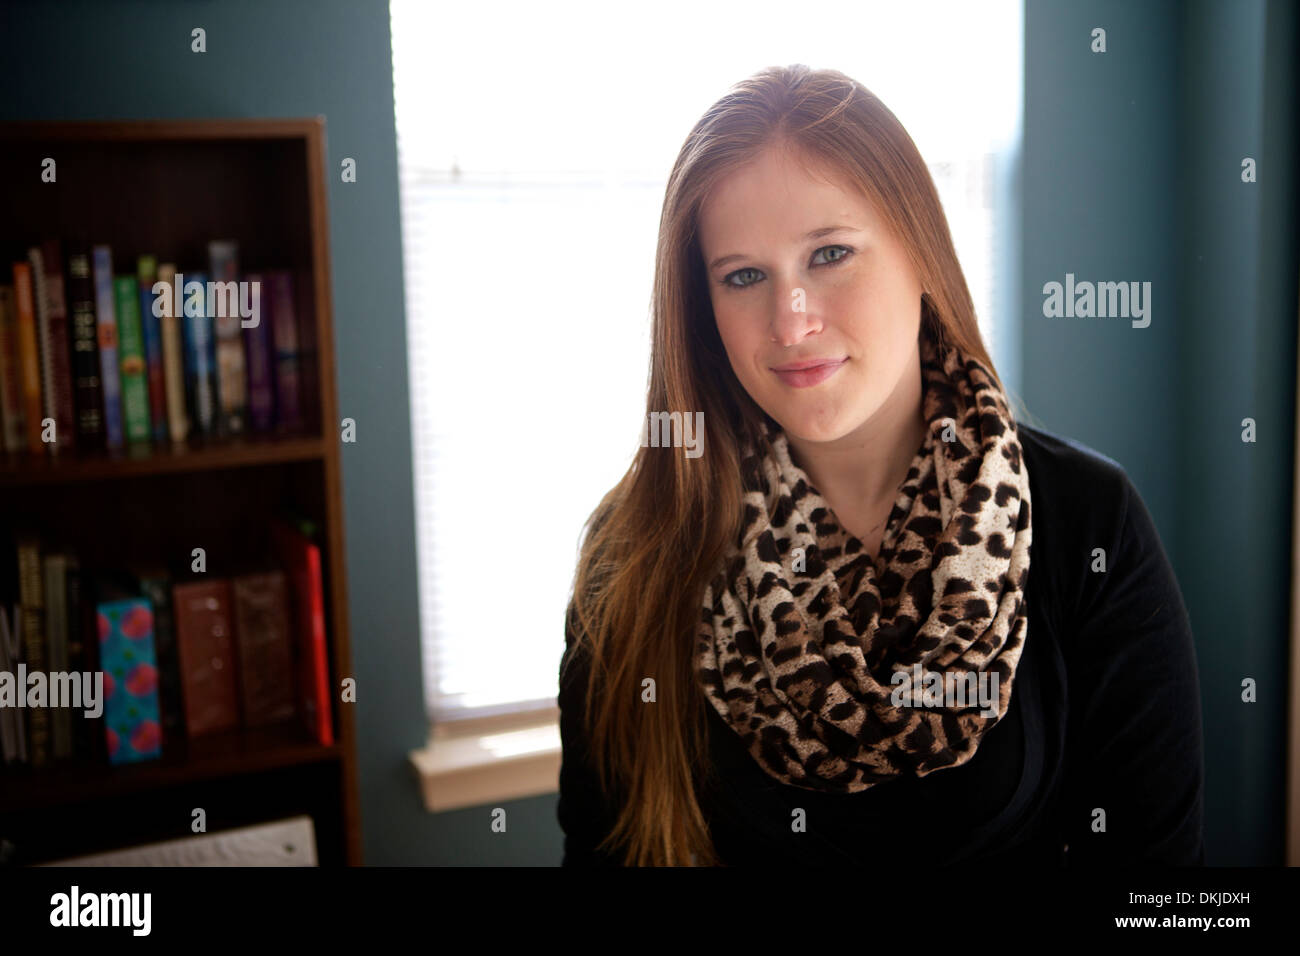 Portrait of a young woman preparing to study. Stock Photo